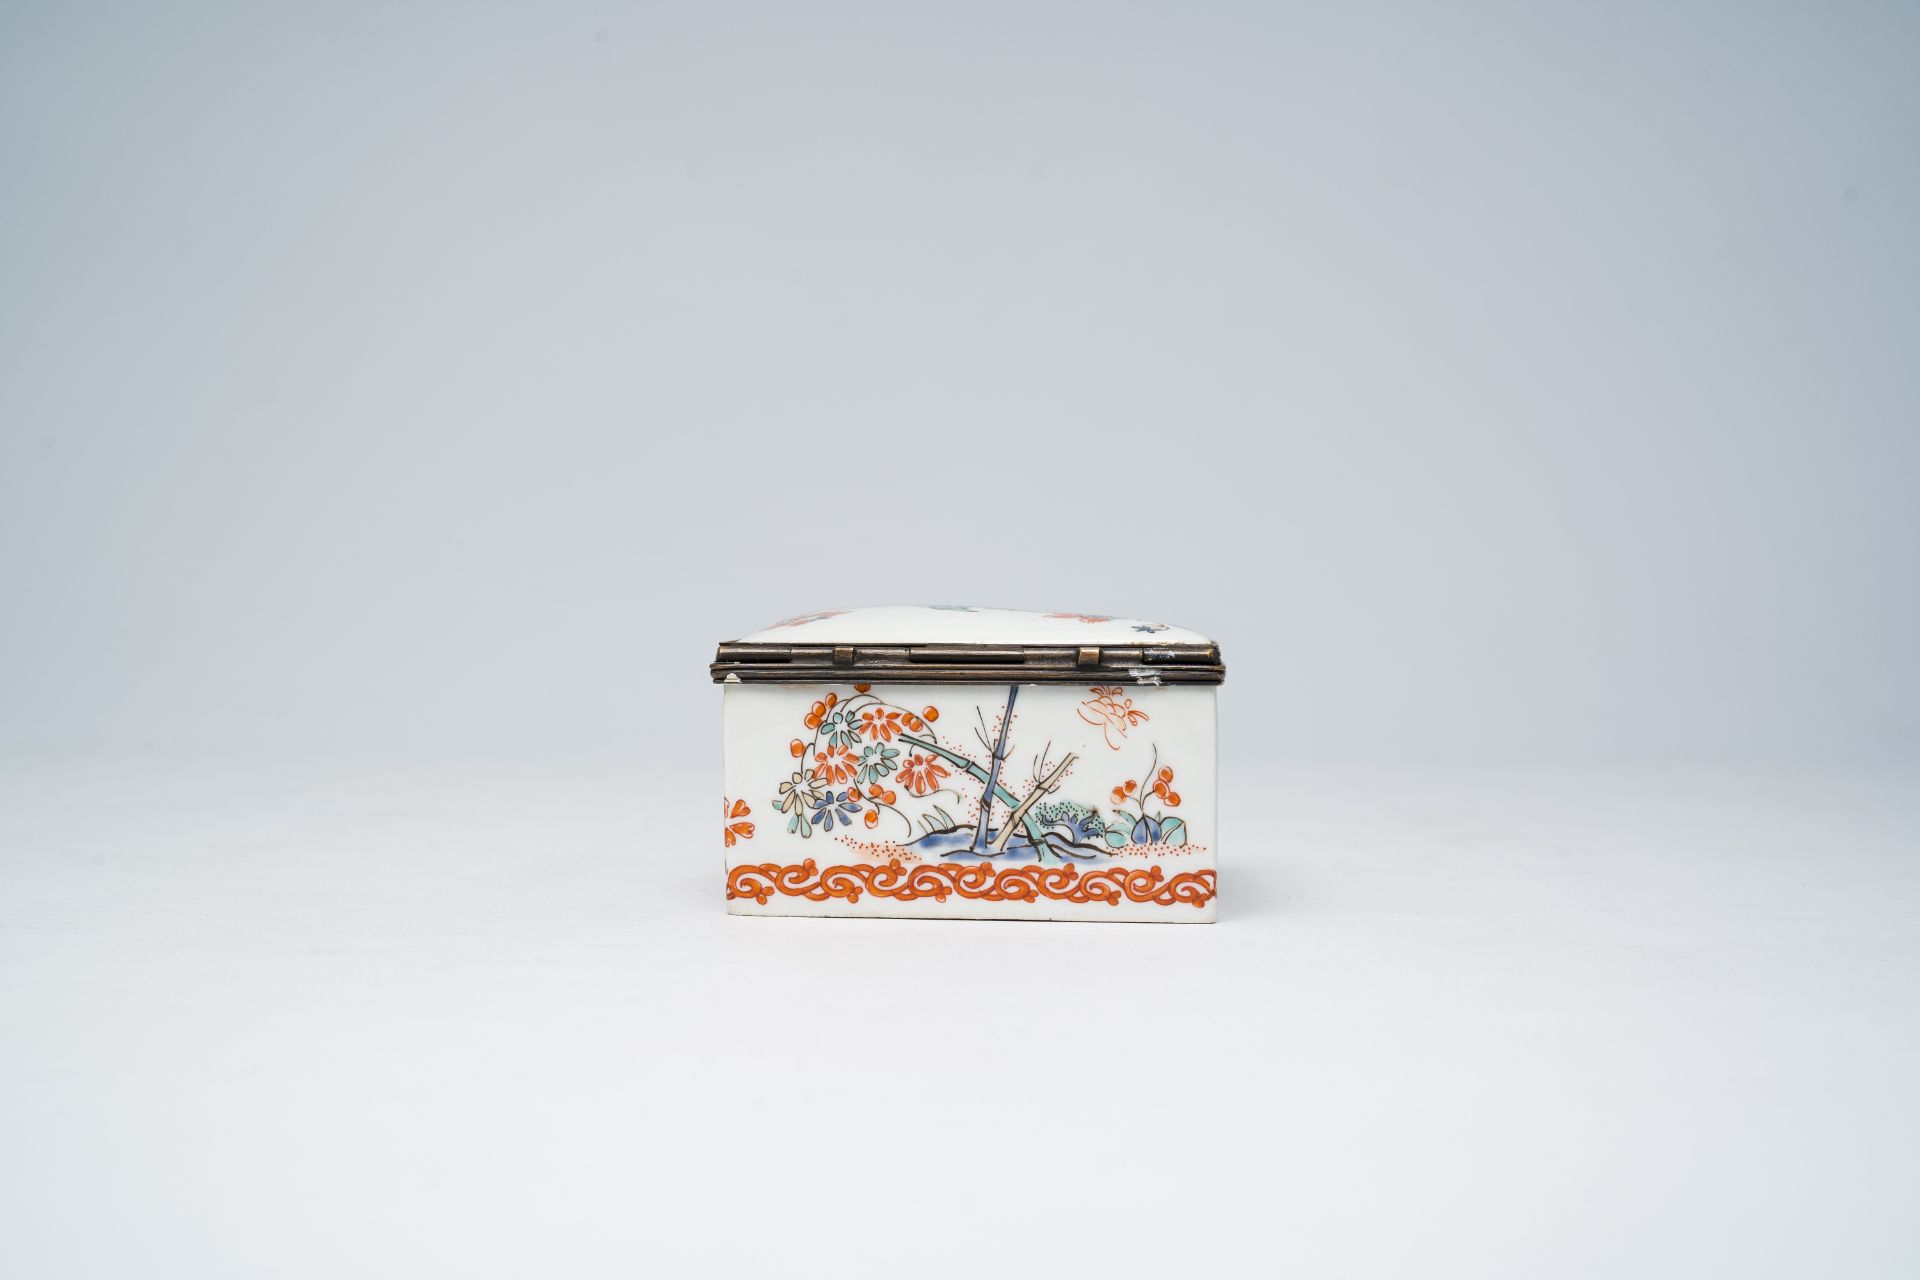 A French Samson Chantilly style box and cover with Kakiemon style floral design, Paris, 19th C. - Image 7 of 8